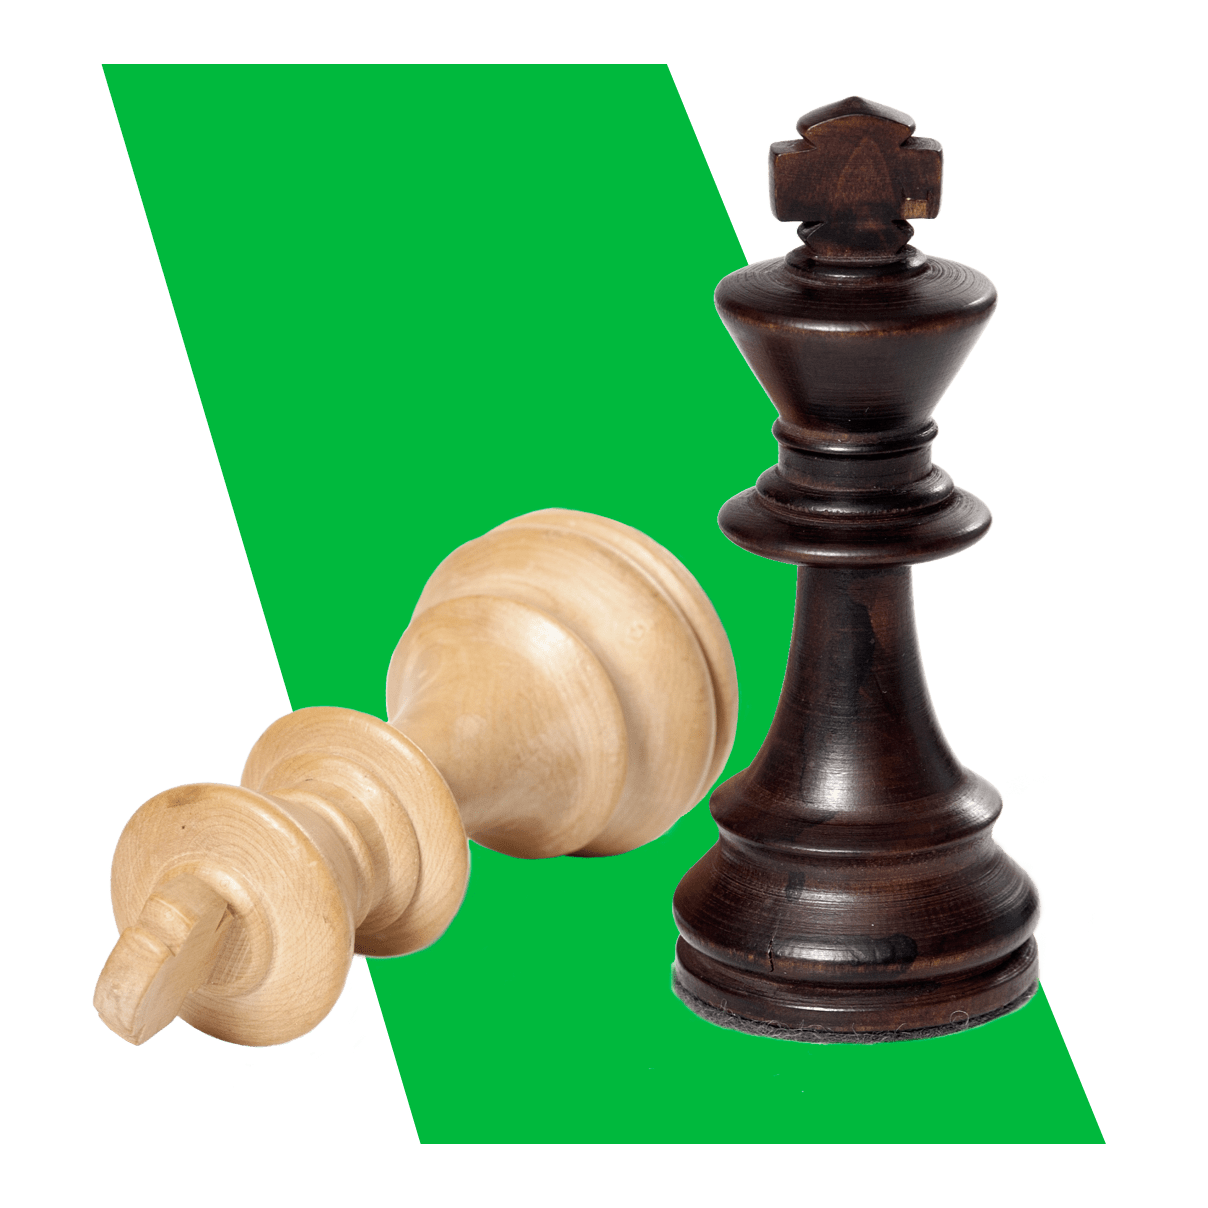 Big Data and Chess: What are the Predictive Point Values of Chess Pieces?